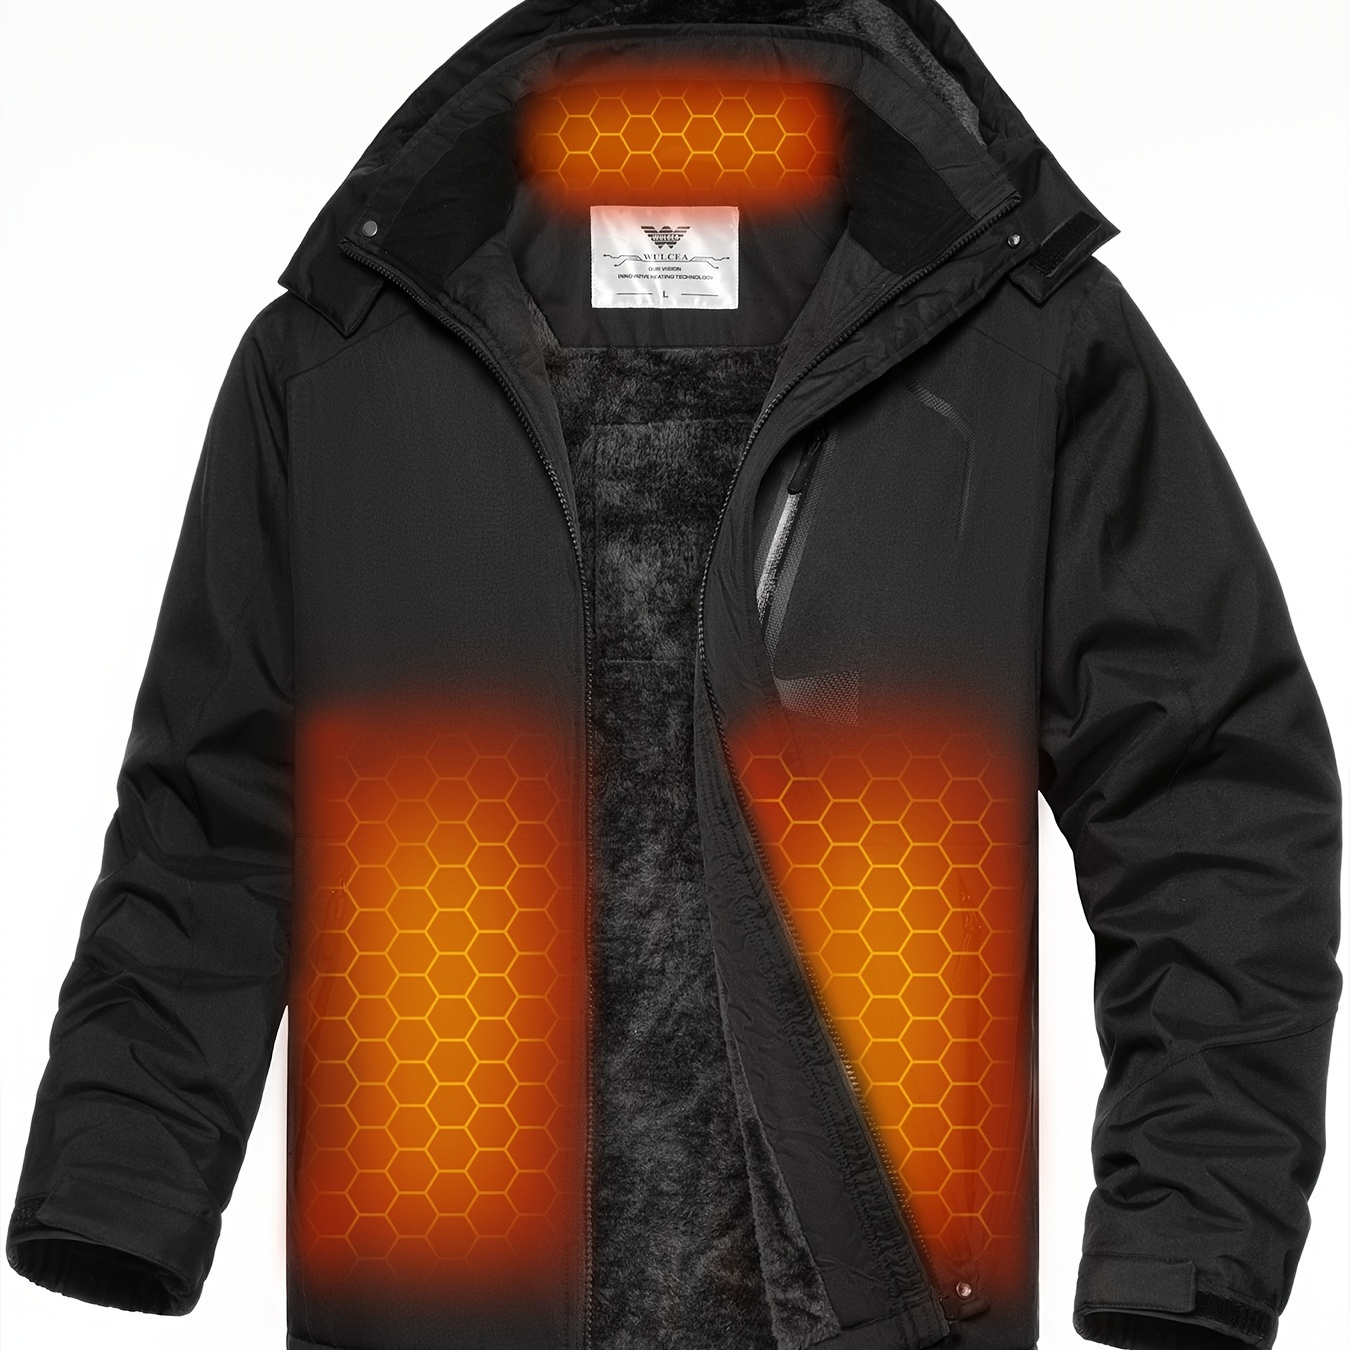 

Men's Hooded Heated Jacket With Usb Rechargeable Battery, Windproof & Water-resistant, Sporty Casual Style